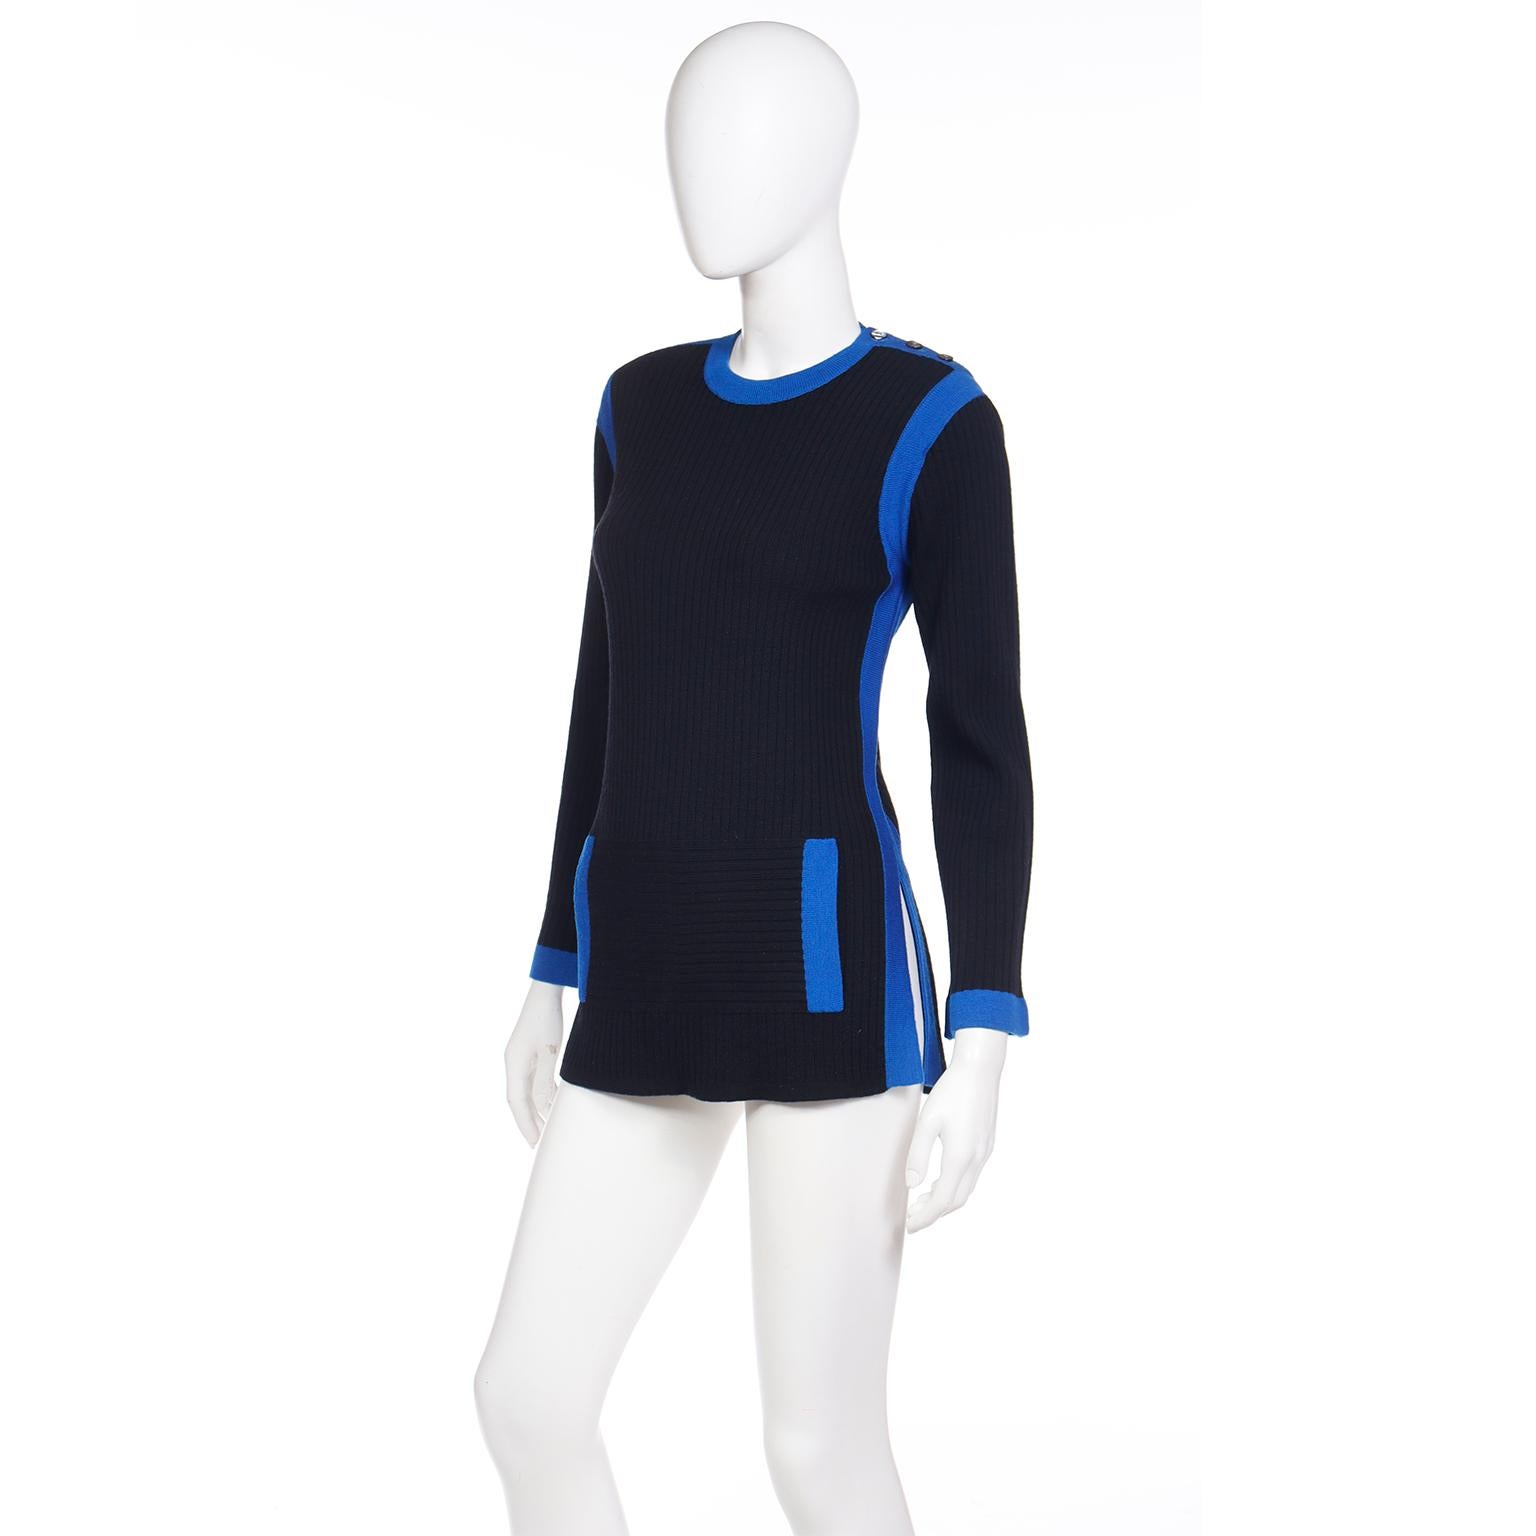 Yves Saint Laurent Vintage Black and Blue Knit Pullover Sweater In Excellent Condition For Sale In Portland, OR